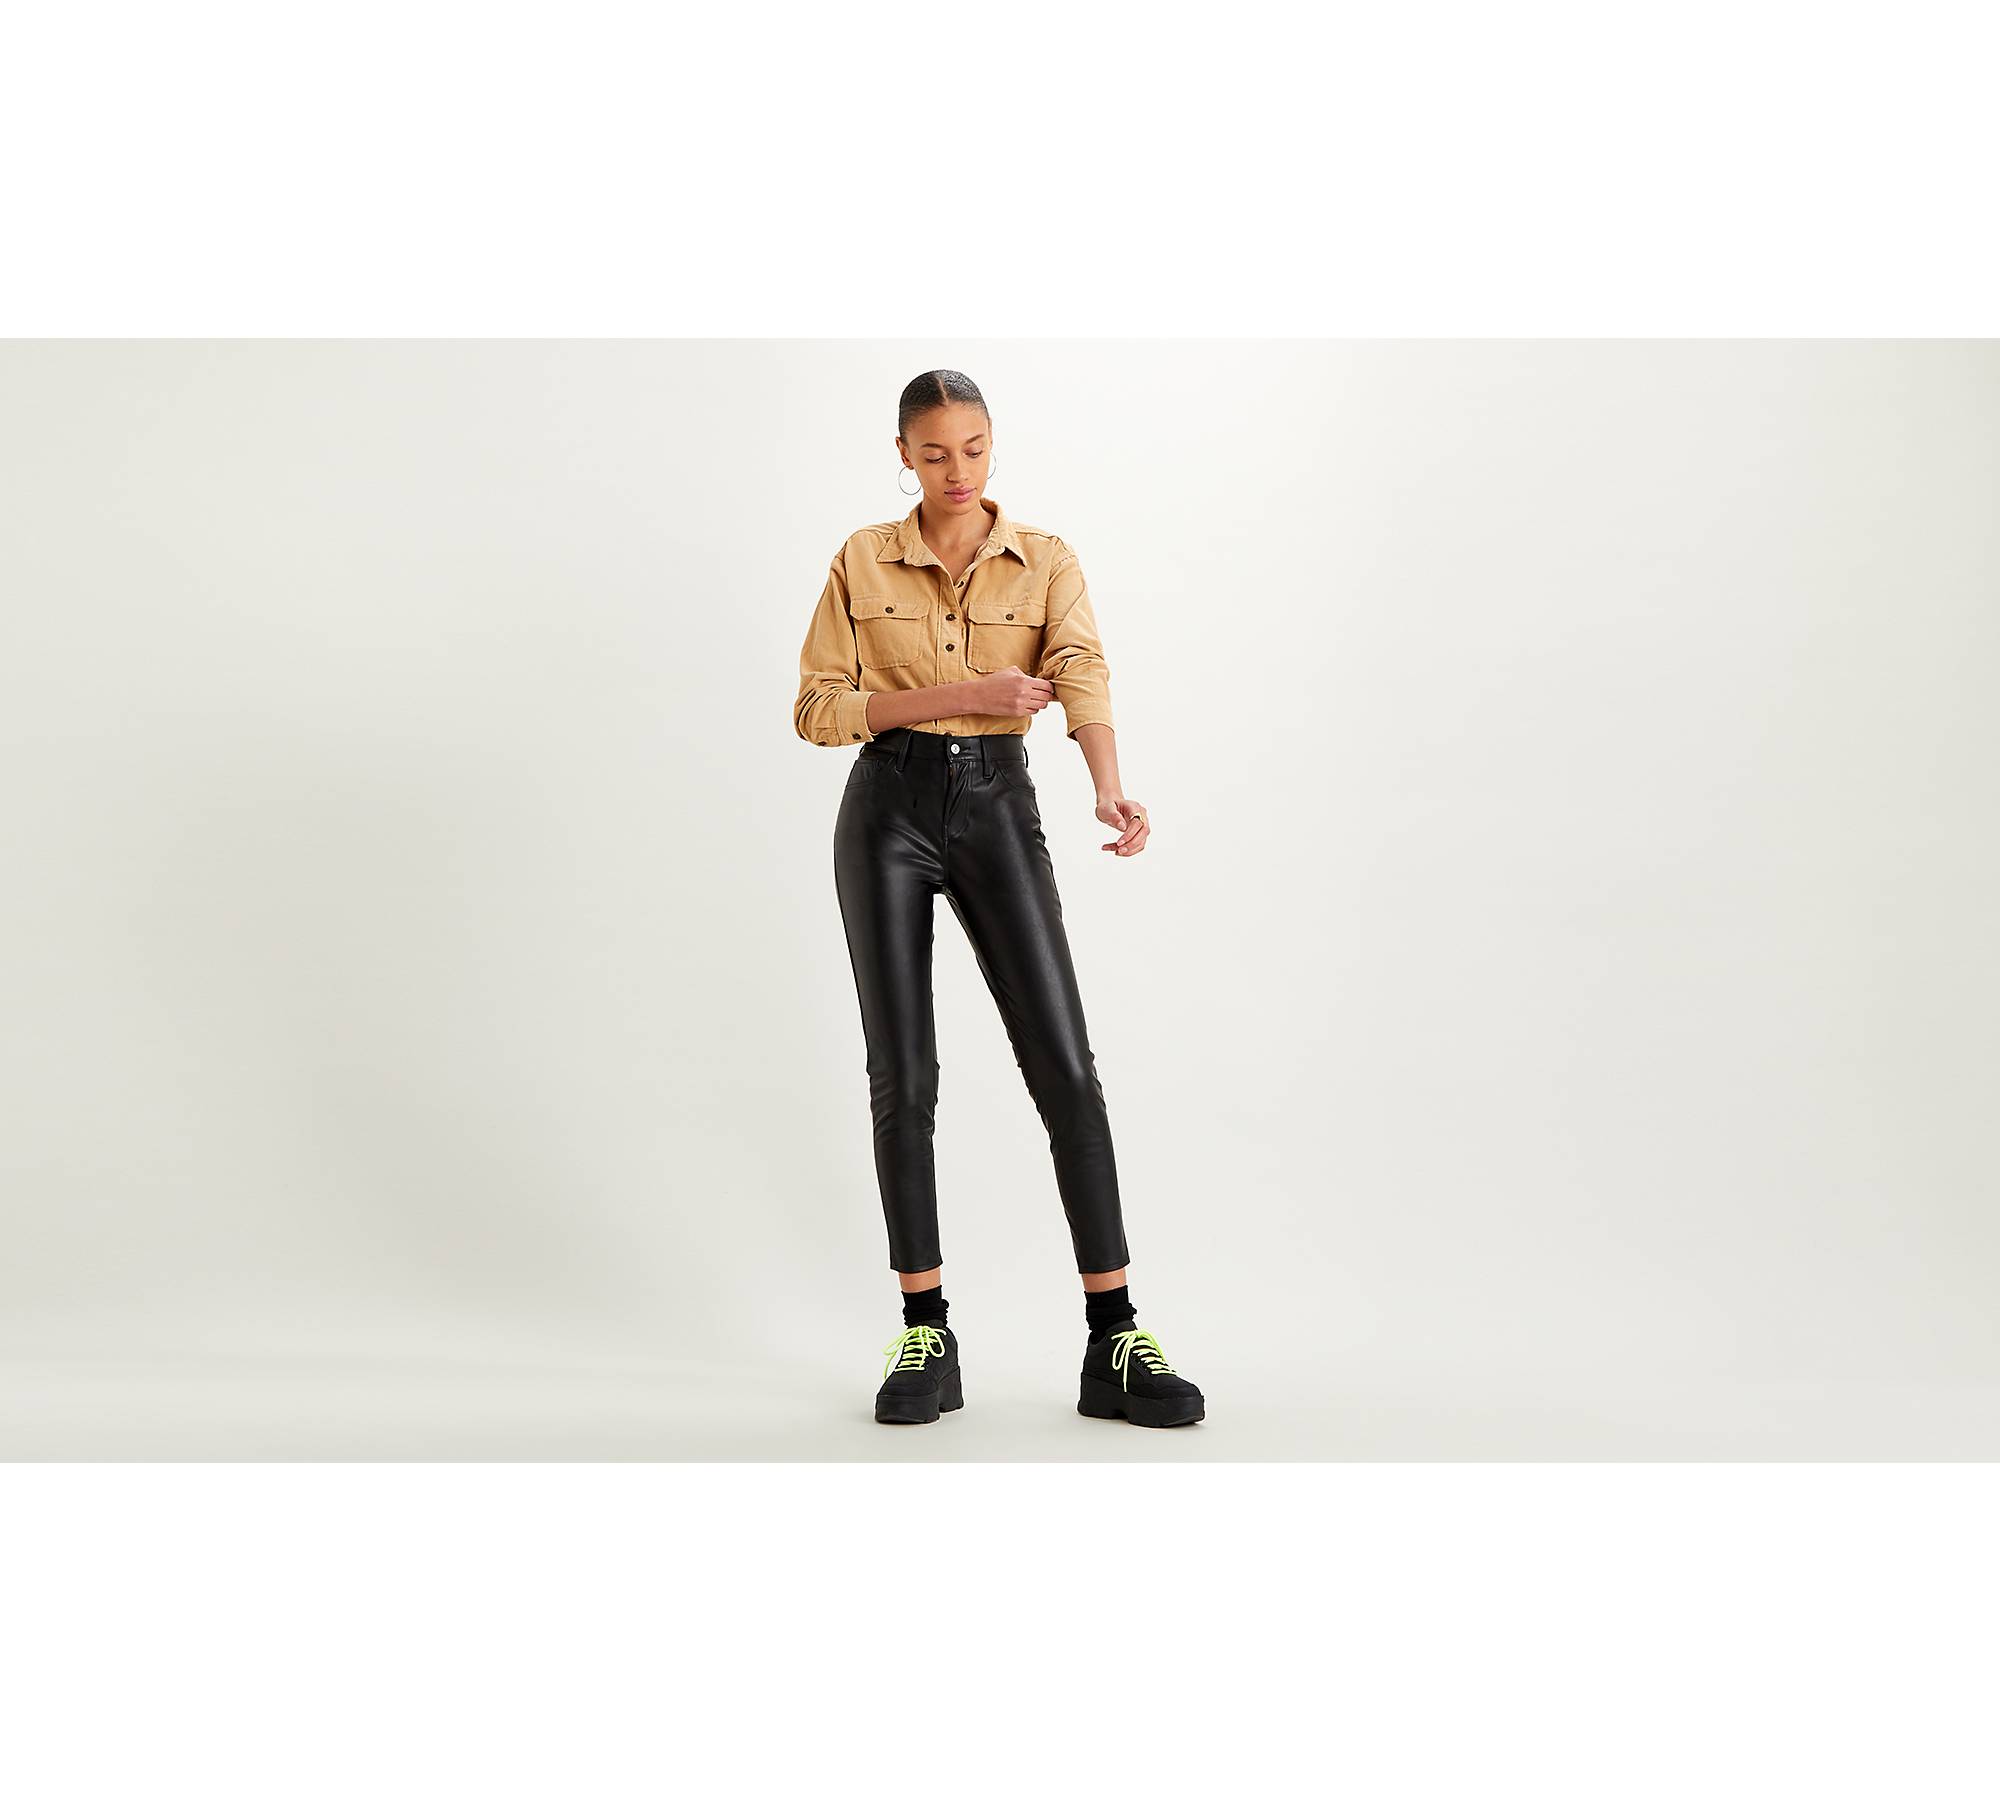 Skinny fit: faux leather trousers - black